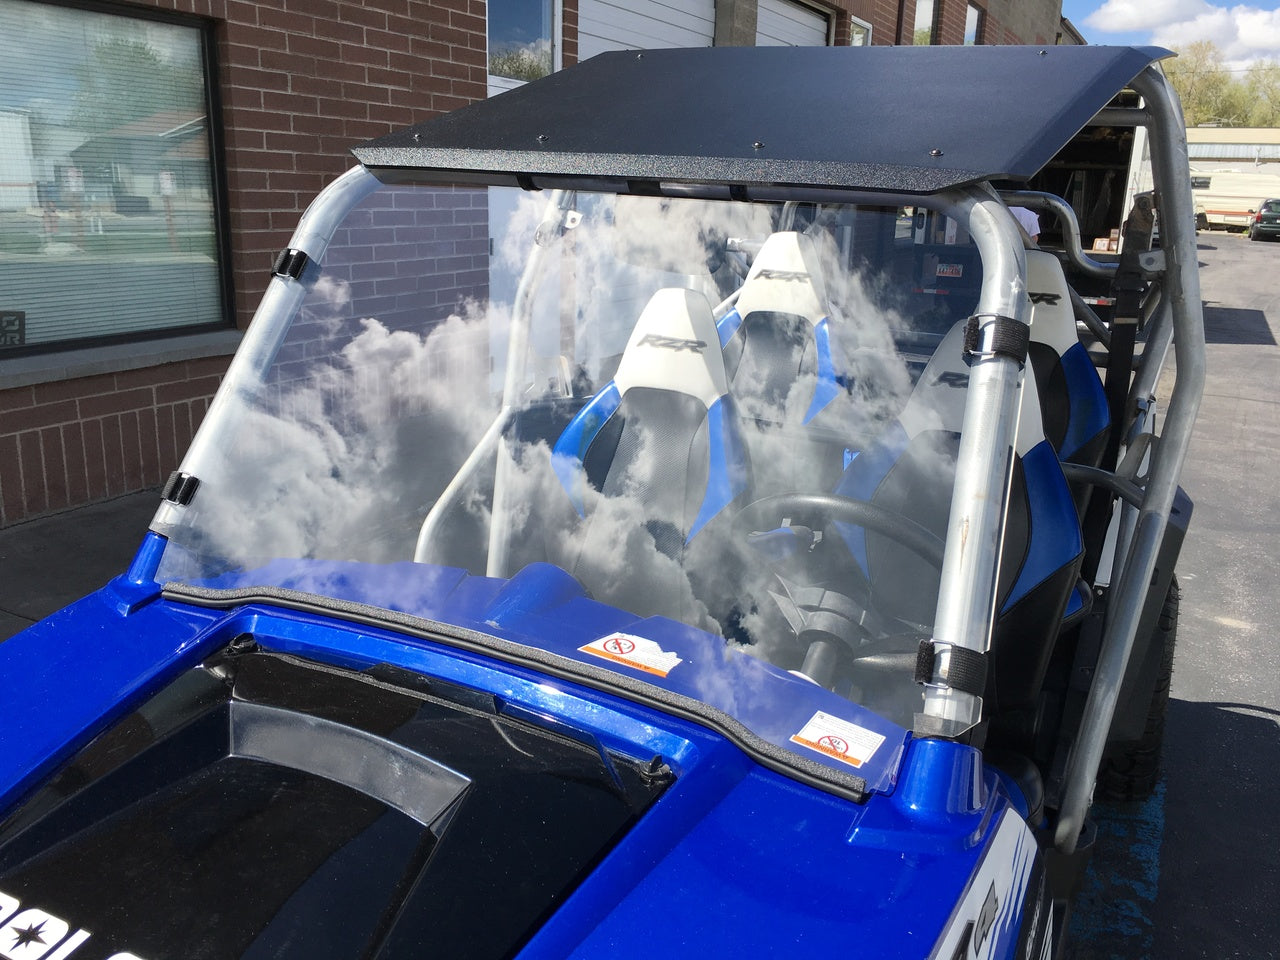 Full Polycarbonate Windshield with Quick Straps for RZR 570, 800, XP900 (upgrade options)